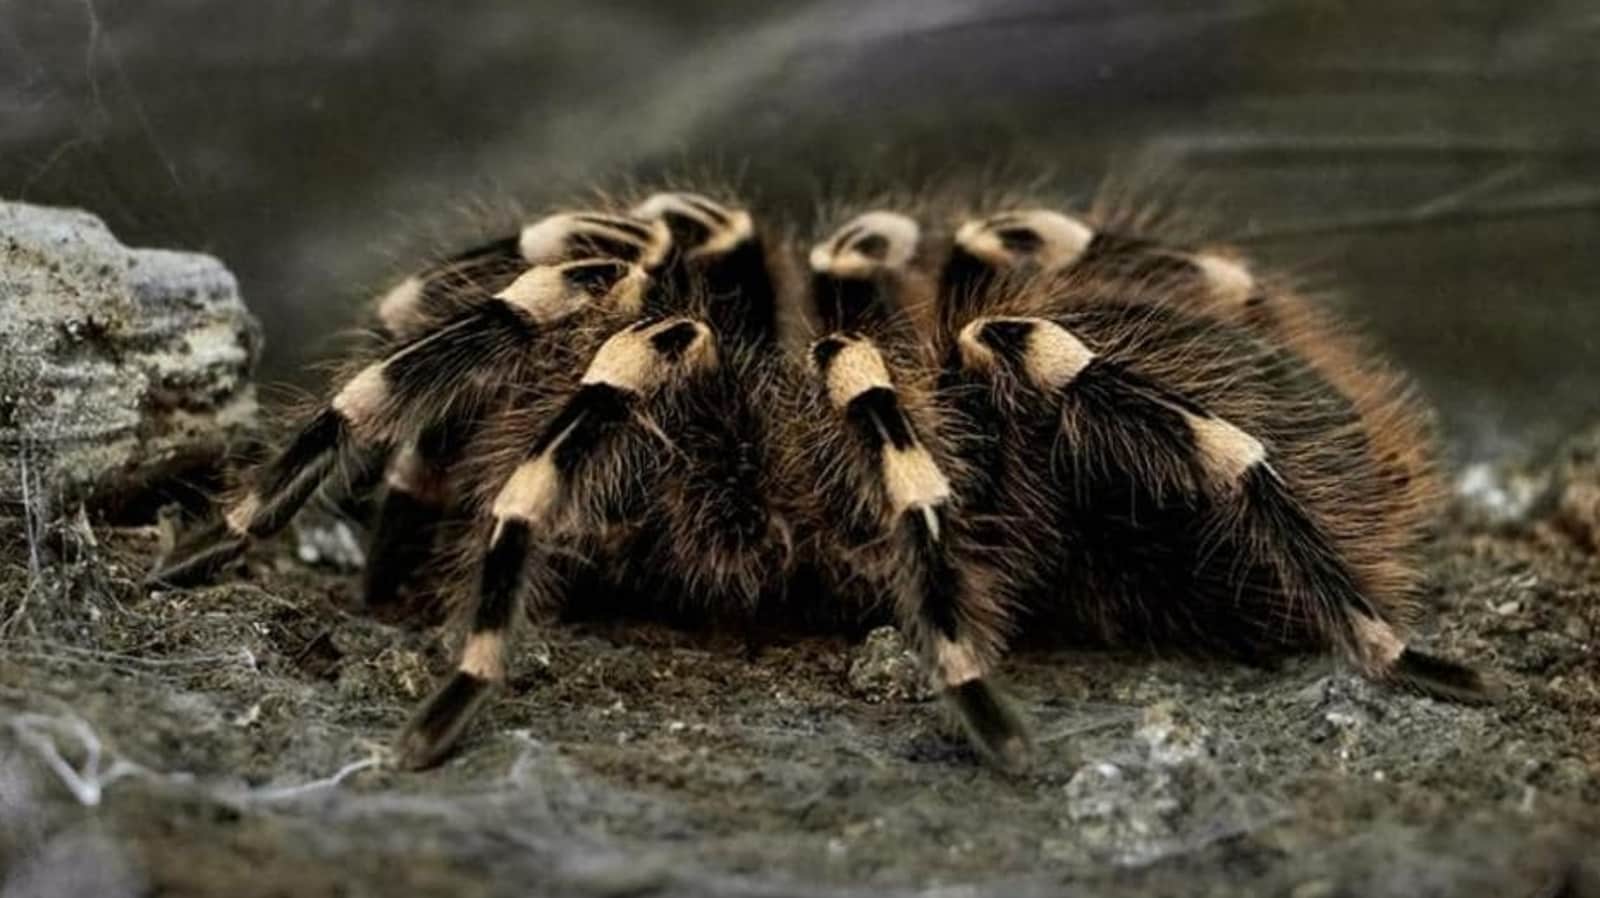 Tarantula leads to biker's accident in Death Valley National Park in USA